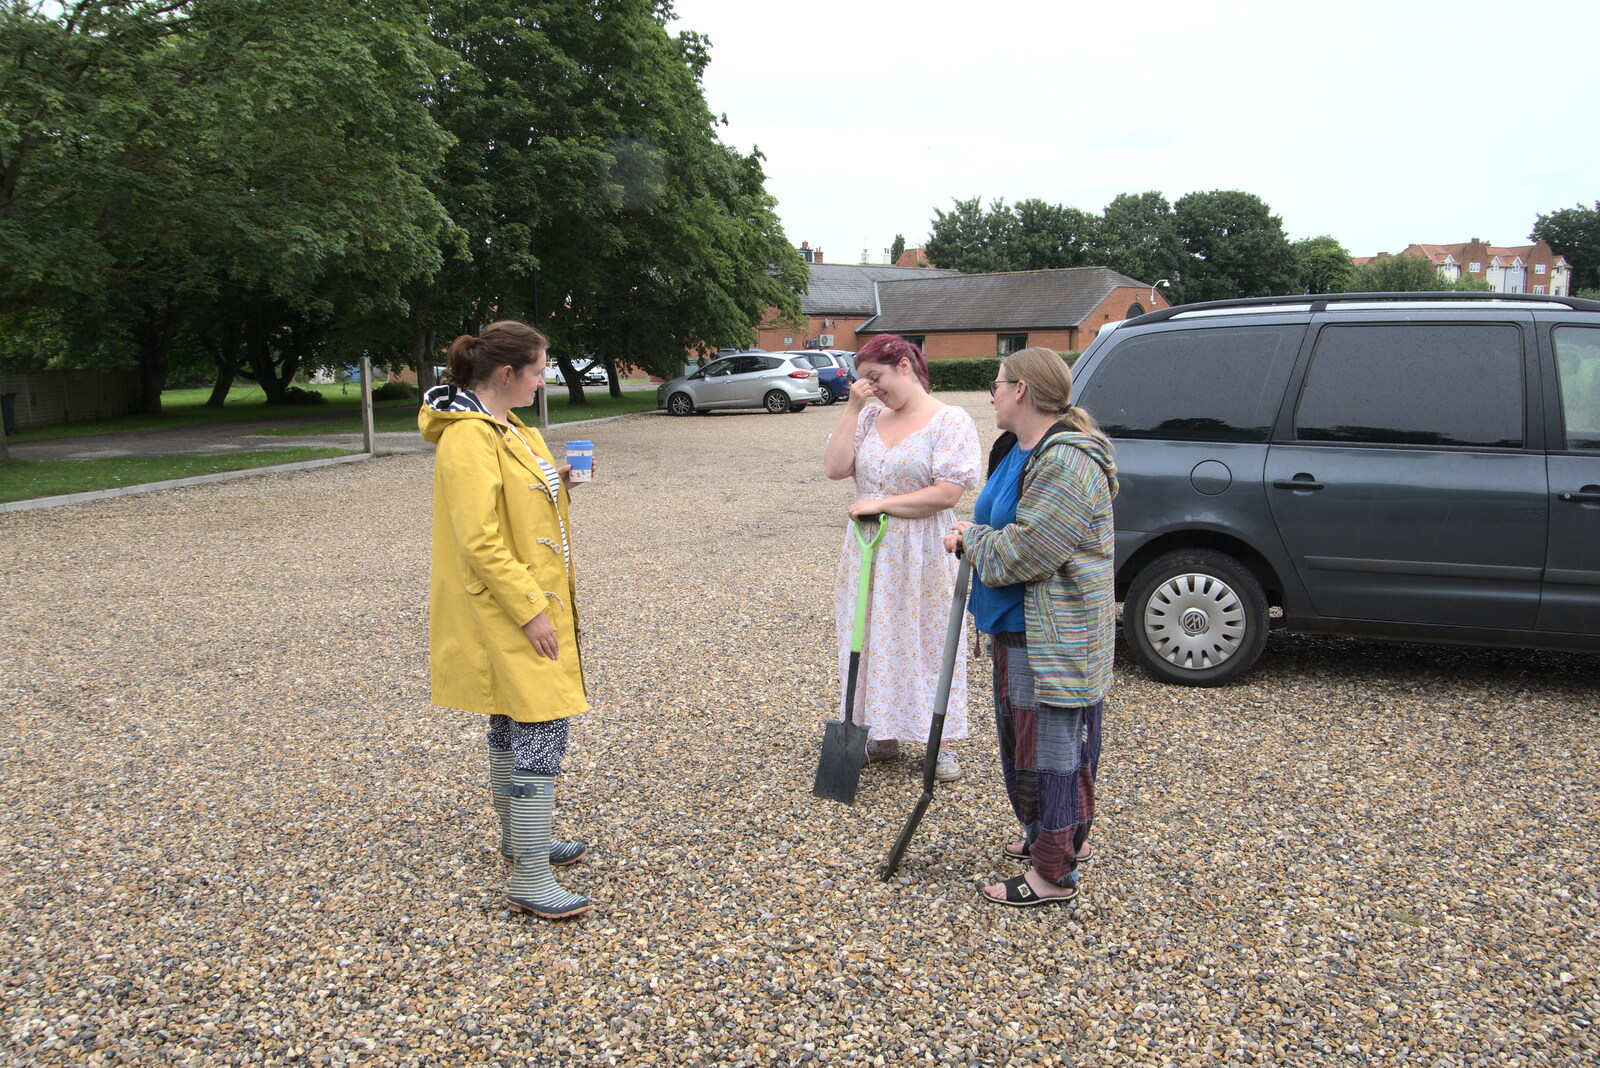 More diggers arrive from Planting a Tree, Town Moors, Eye, Suffolk - 10th July 2021